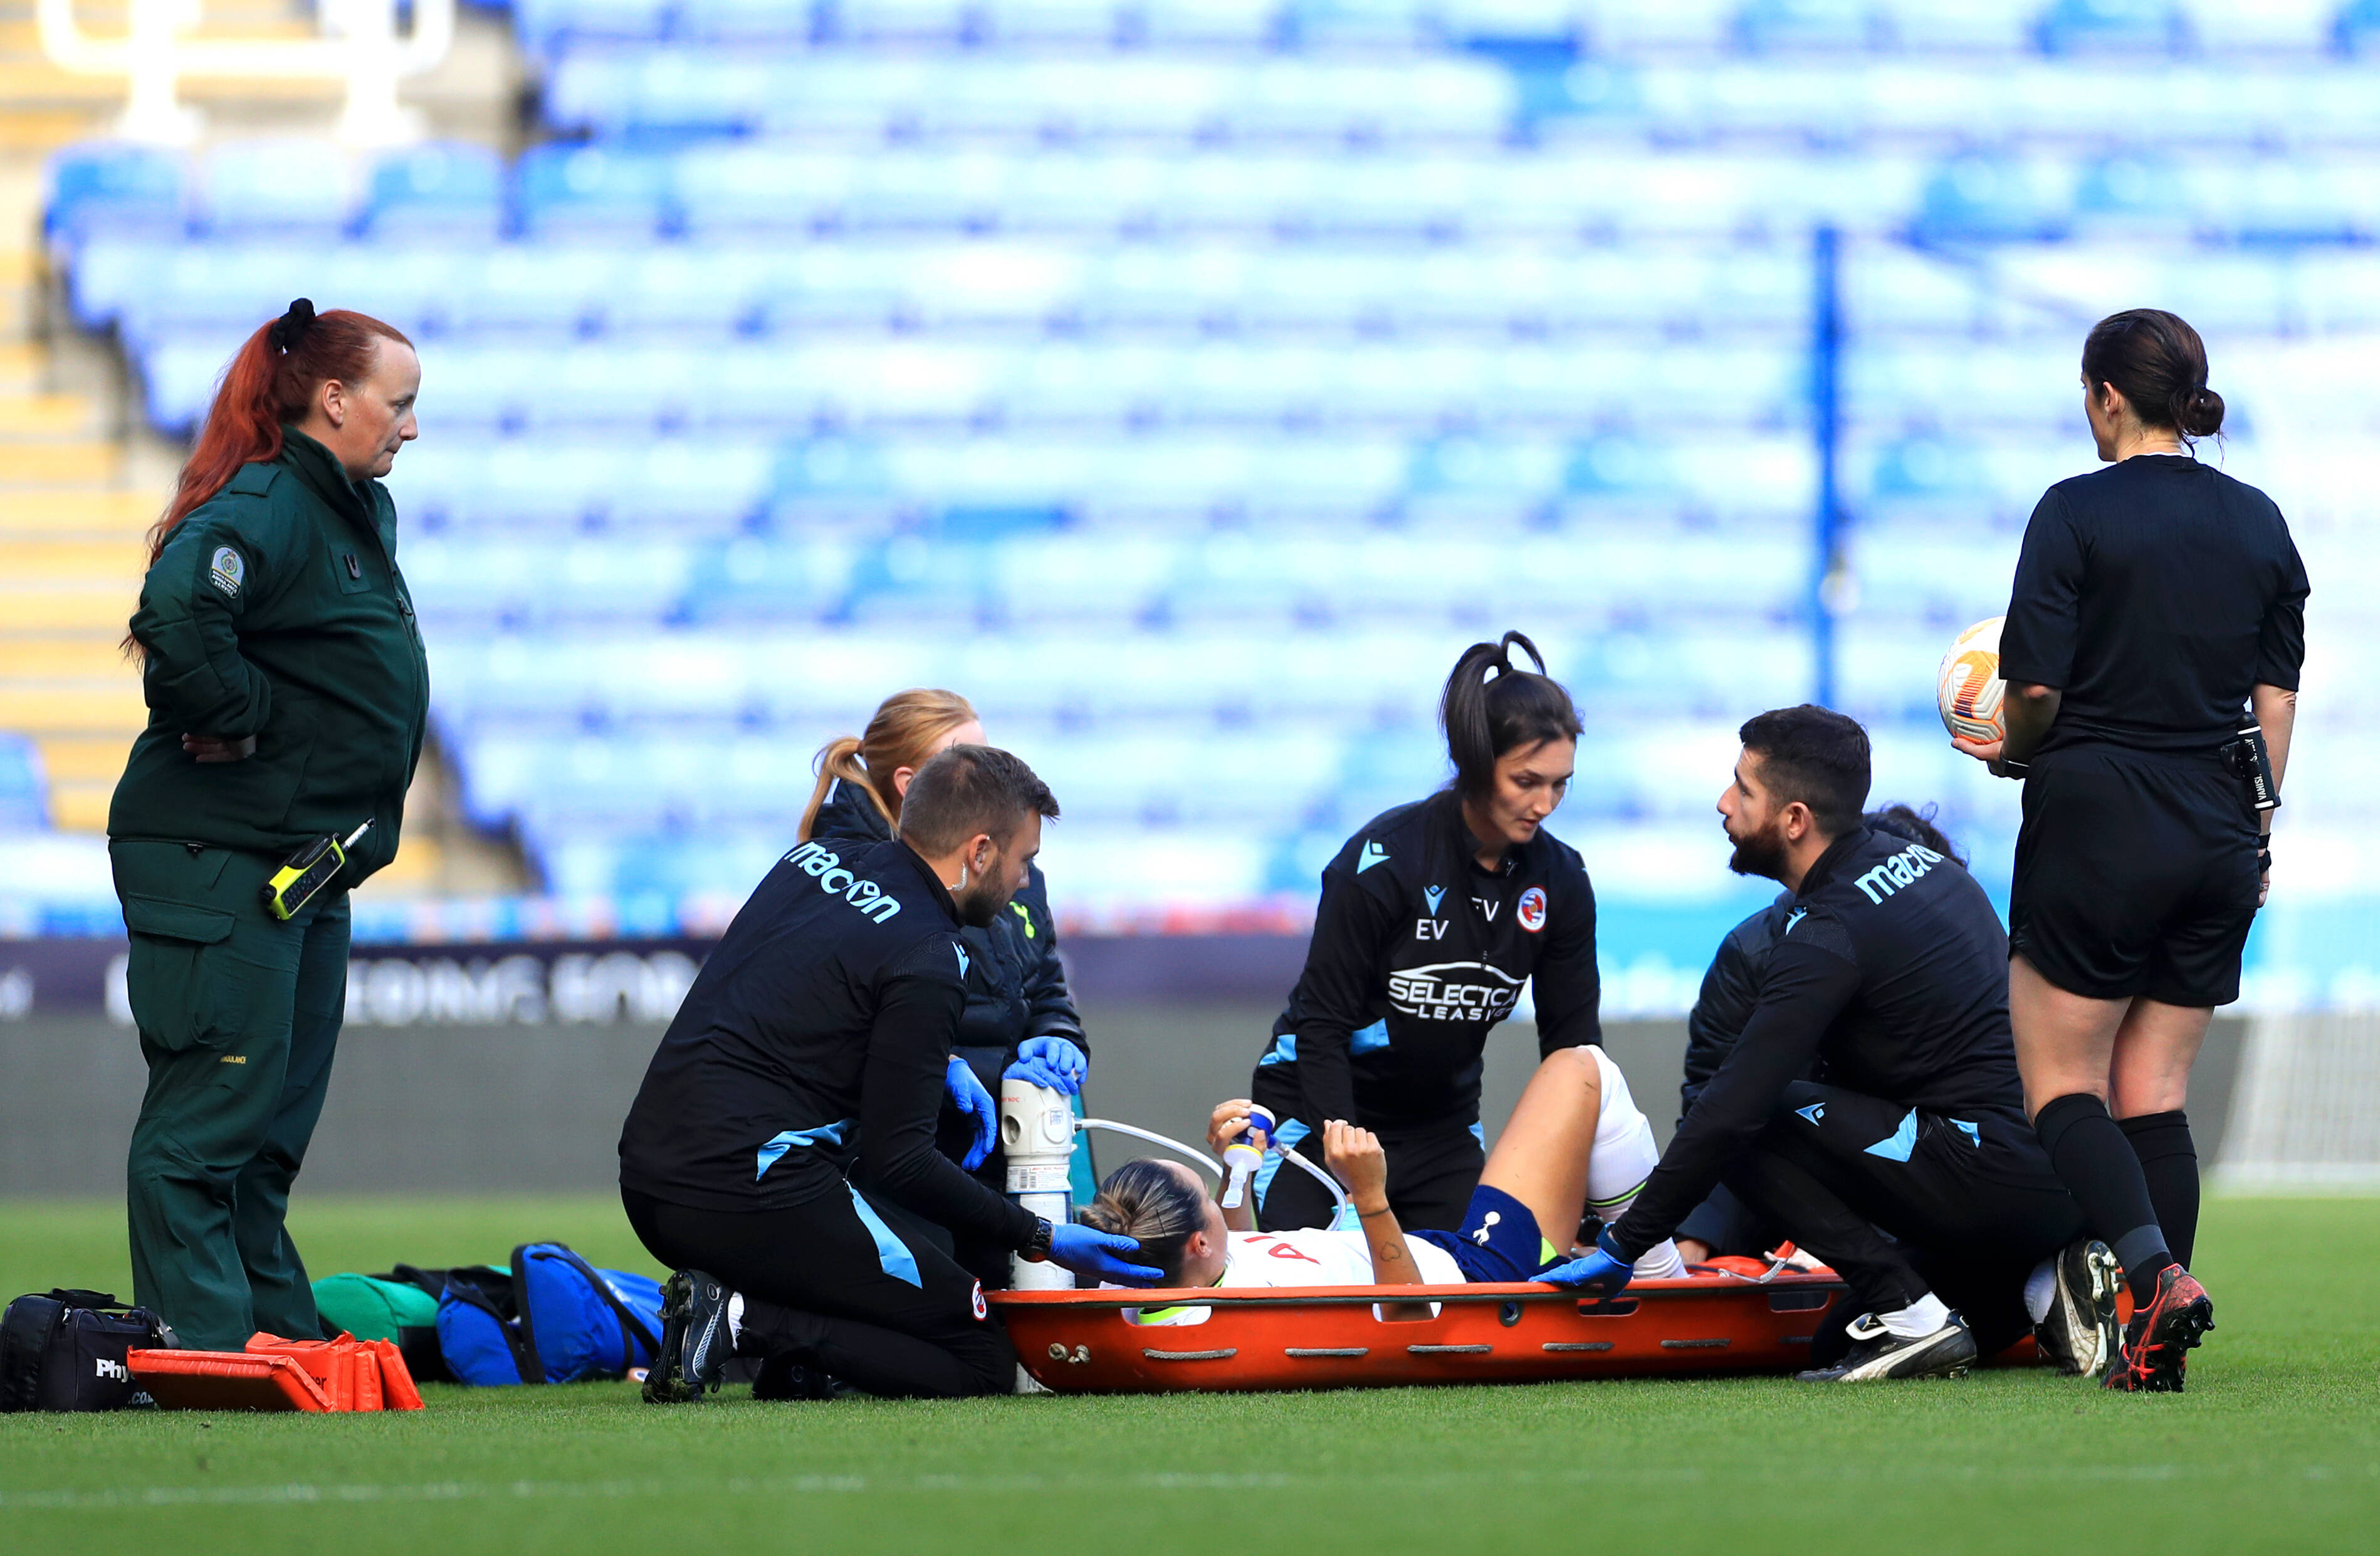 Kyah Simon is placed on a stretcher during the FA Women s Continental League Cup group match at the Select Car Leasing Stadium, Reading. Picture date: Sunday October 2, 2022. 